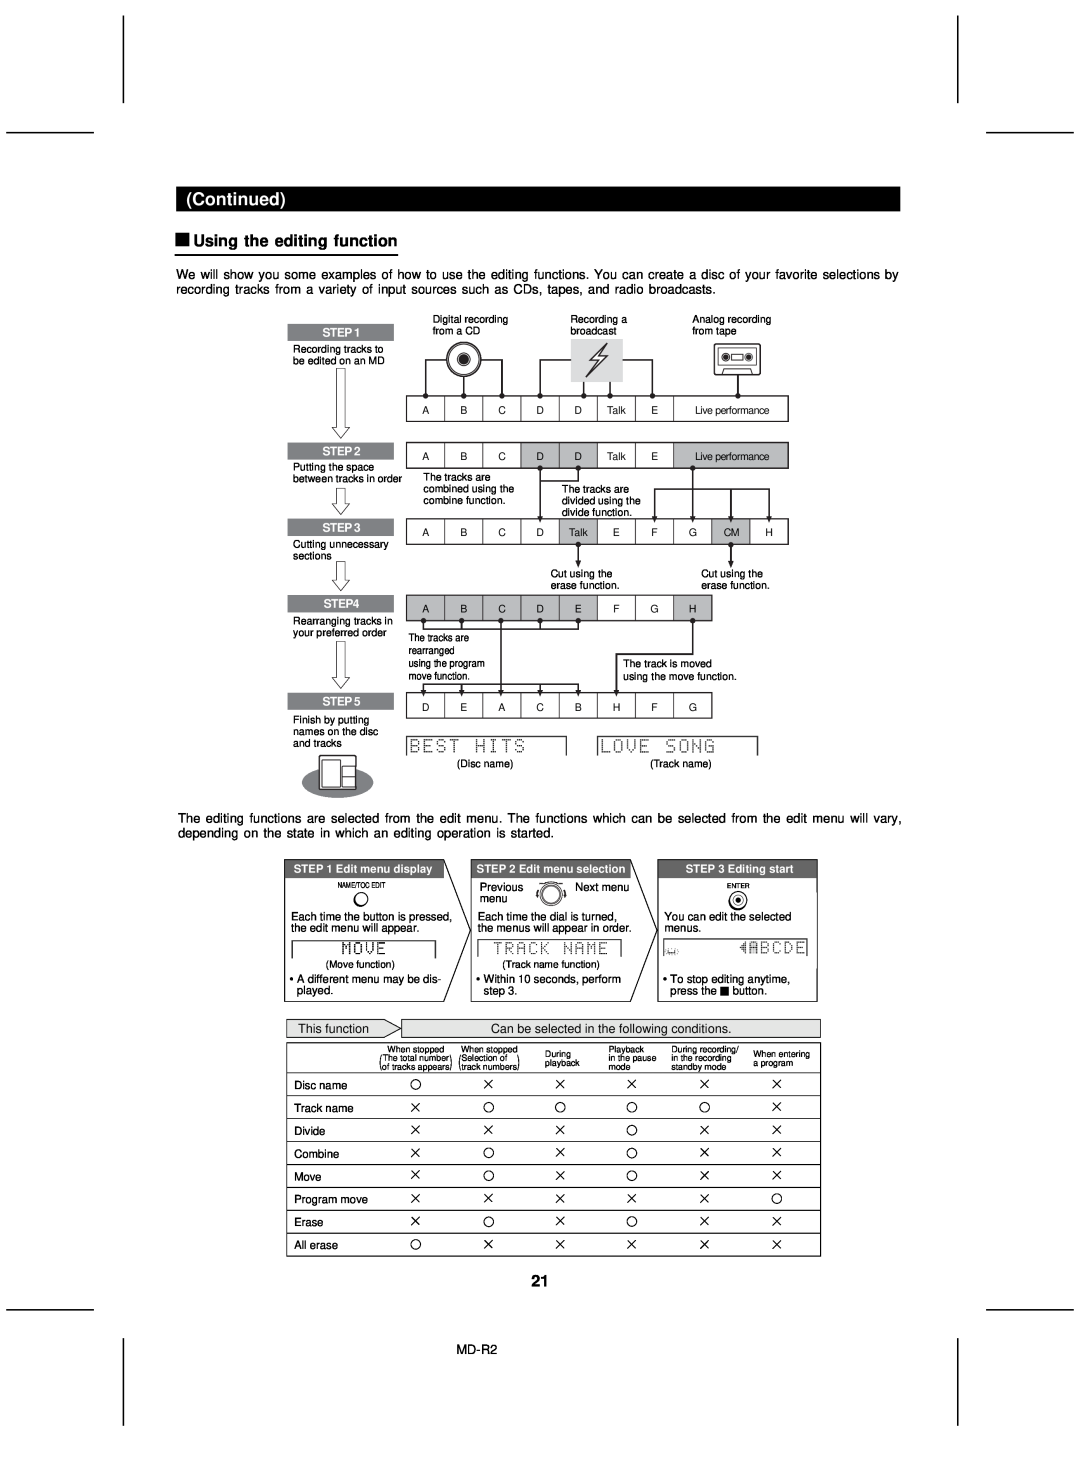 Kenwood MD-R2 operation manual Using the editing function, Continued 